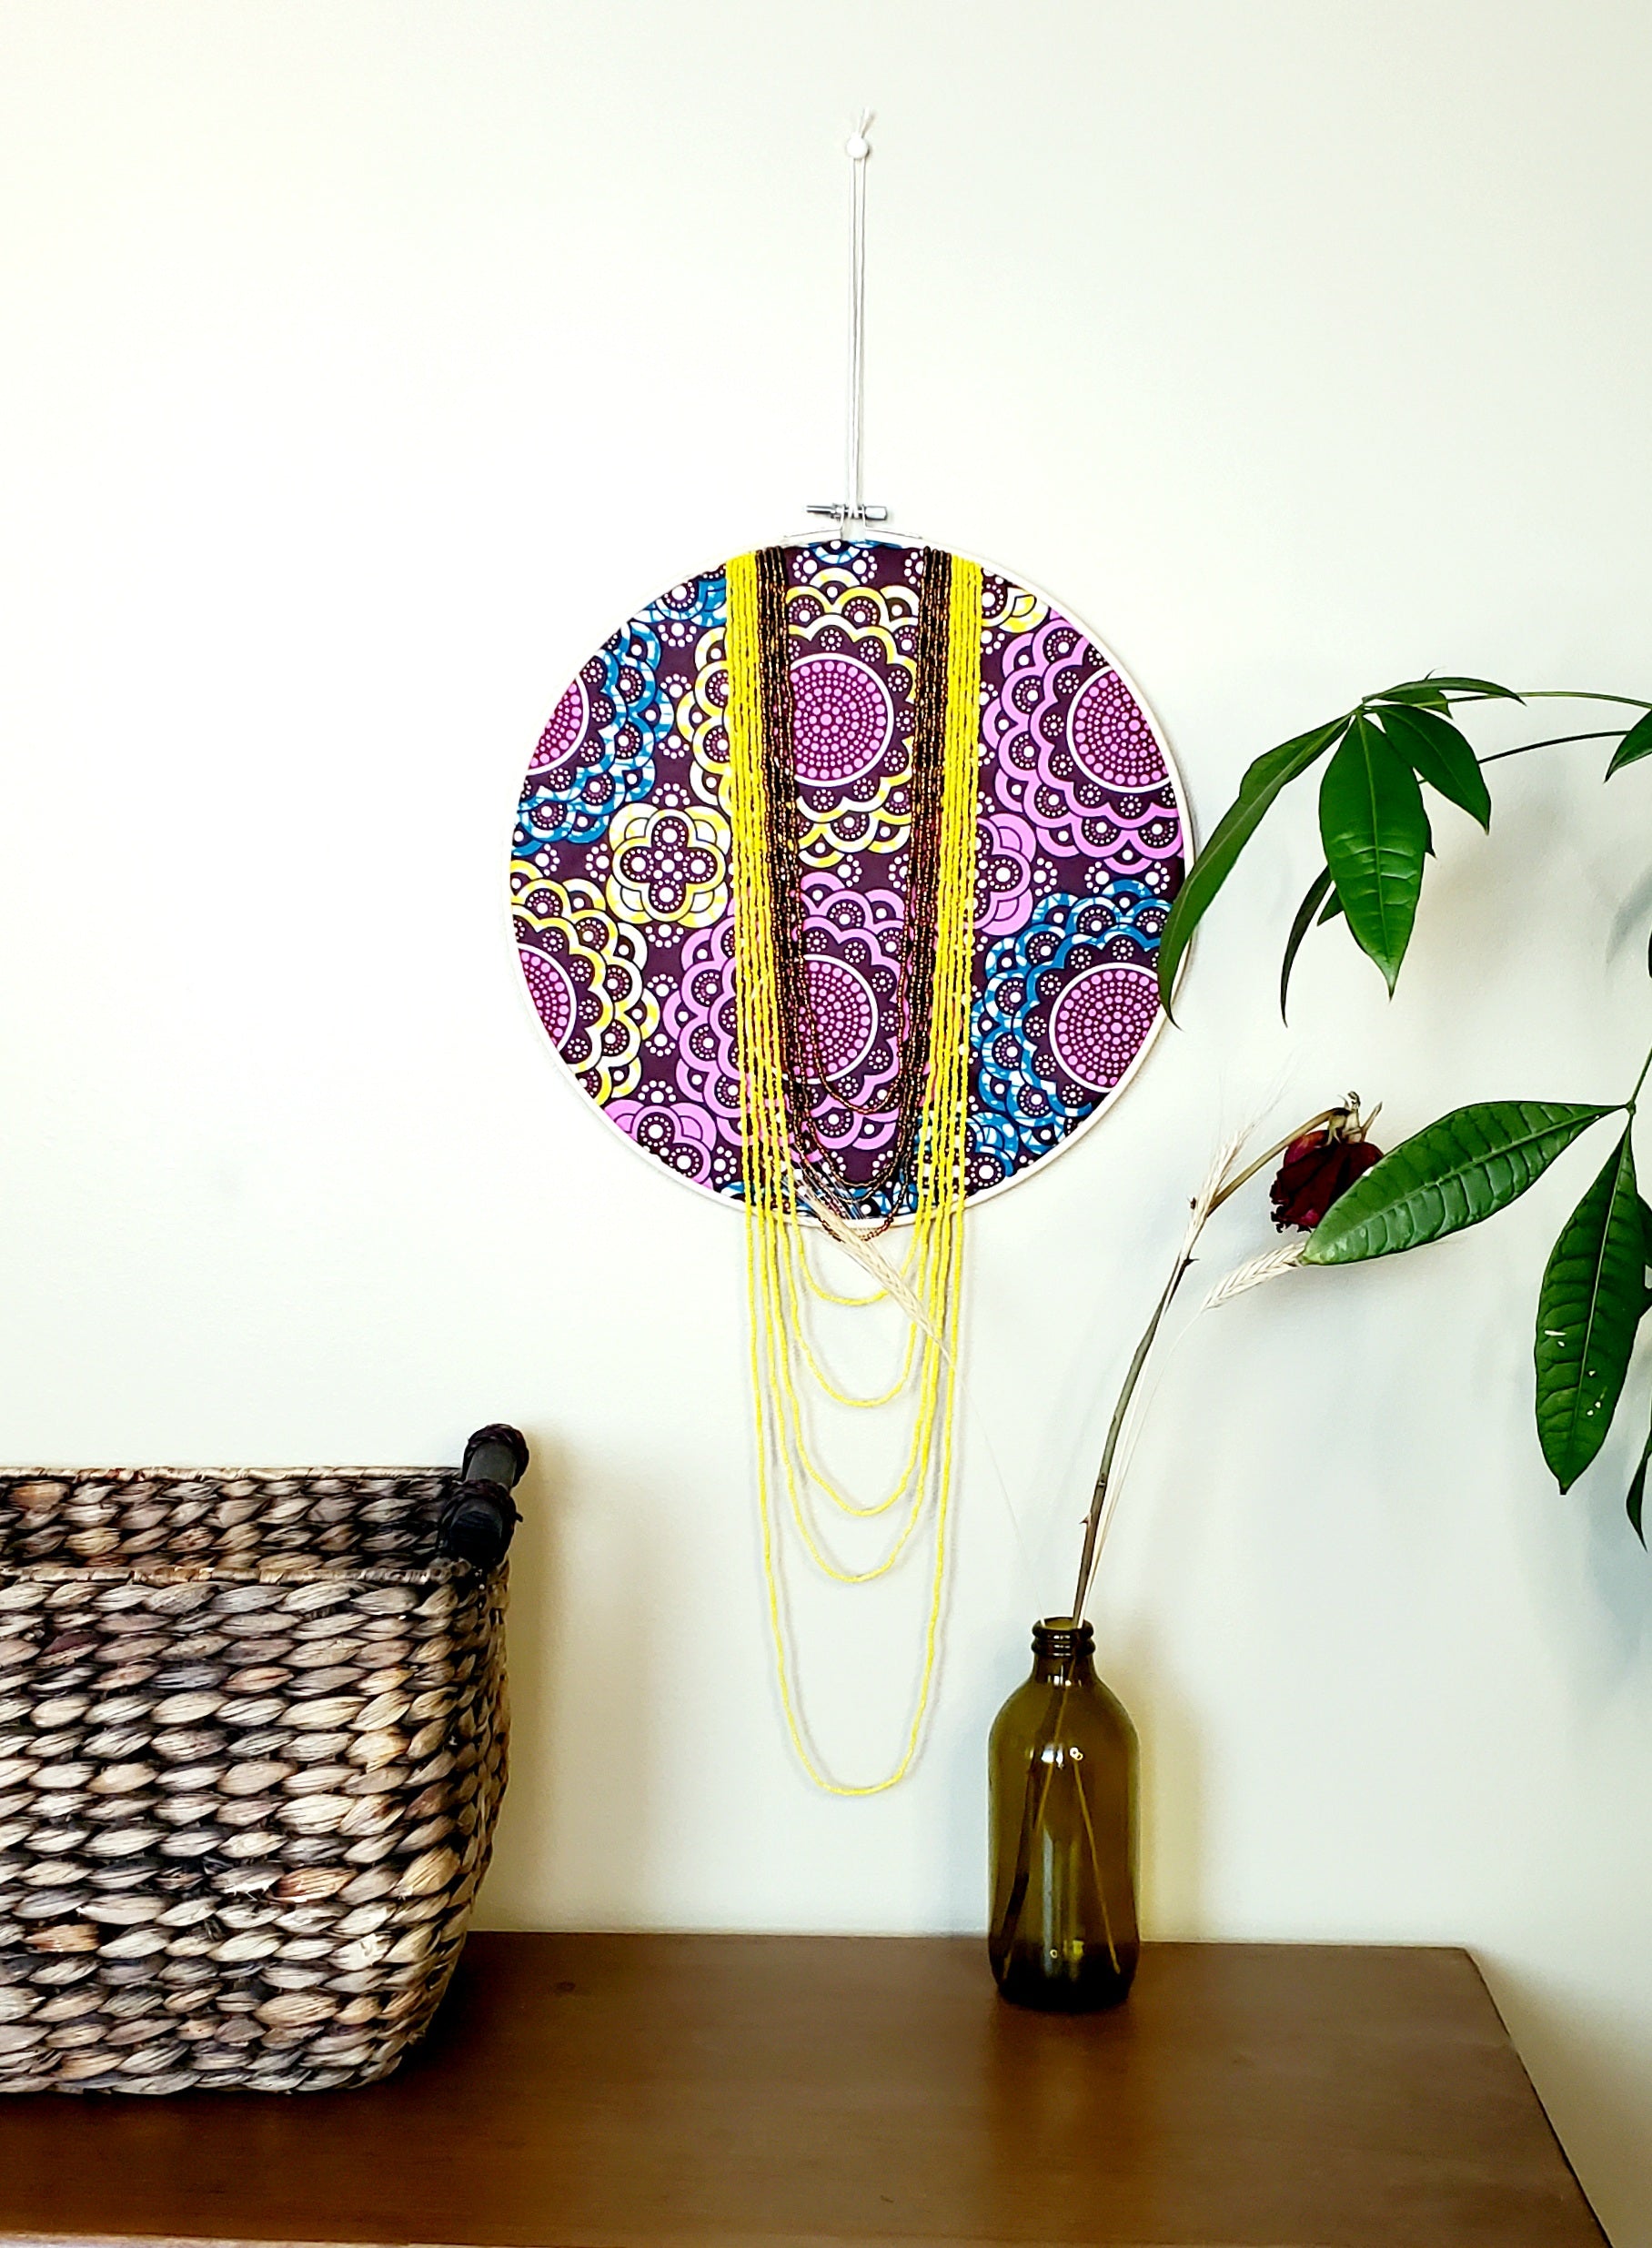 A tip: How to achieve the Boho vibes in your decor!